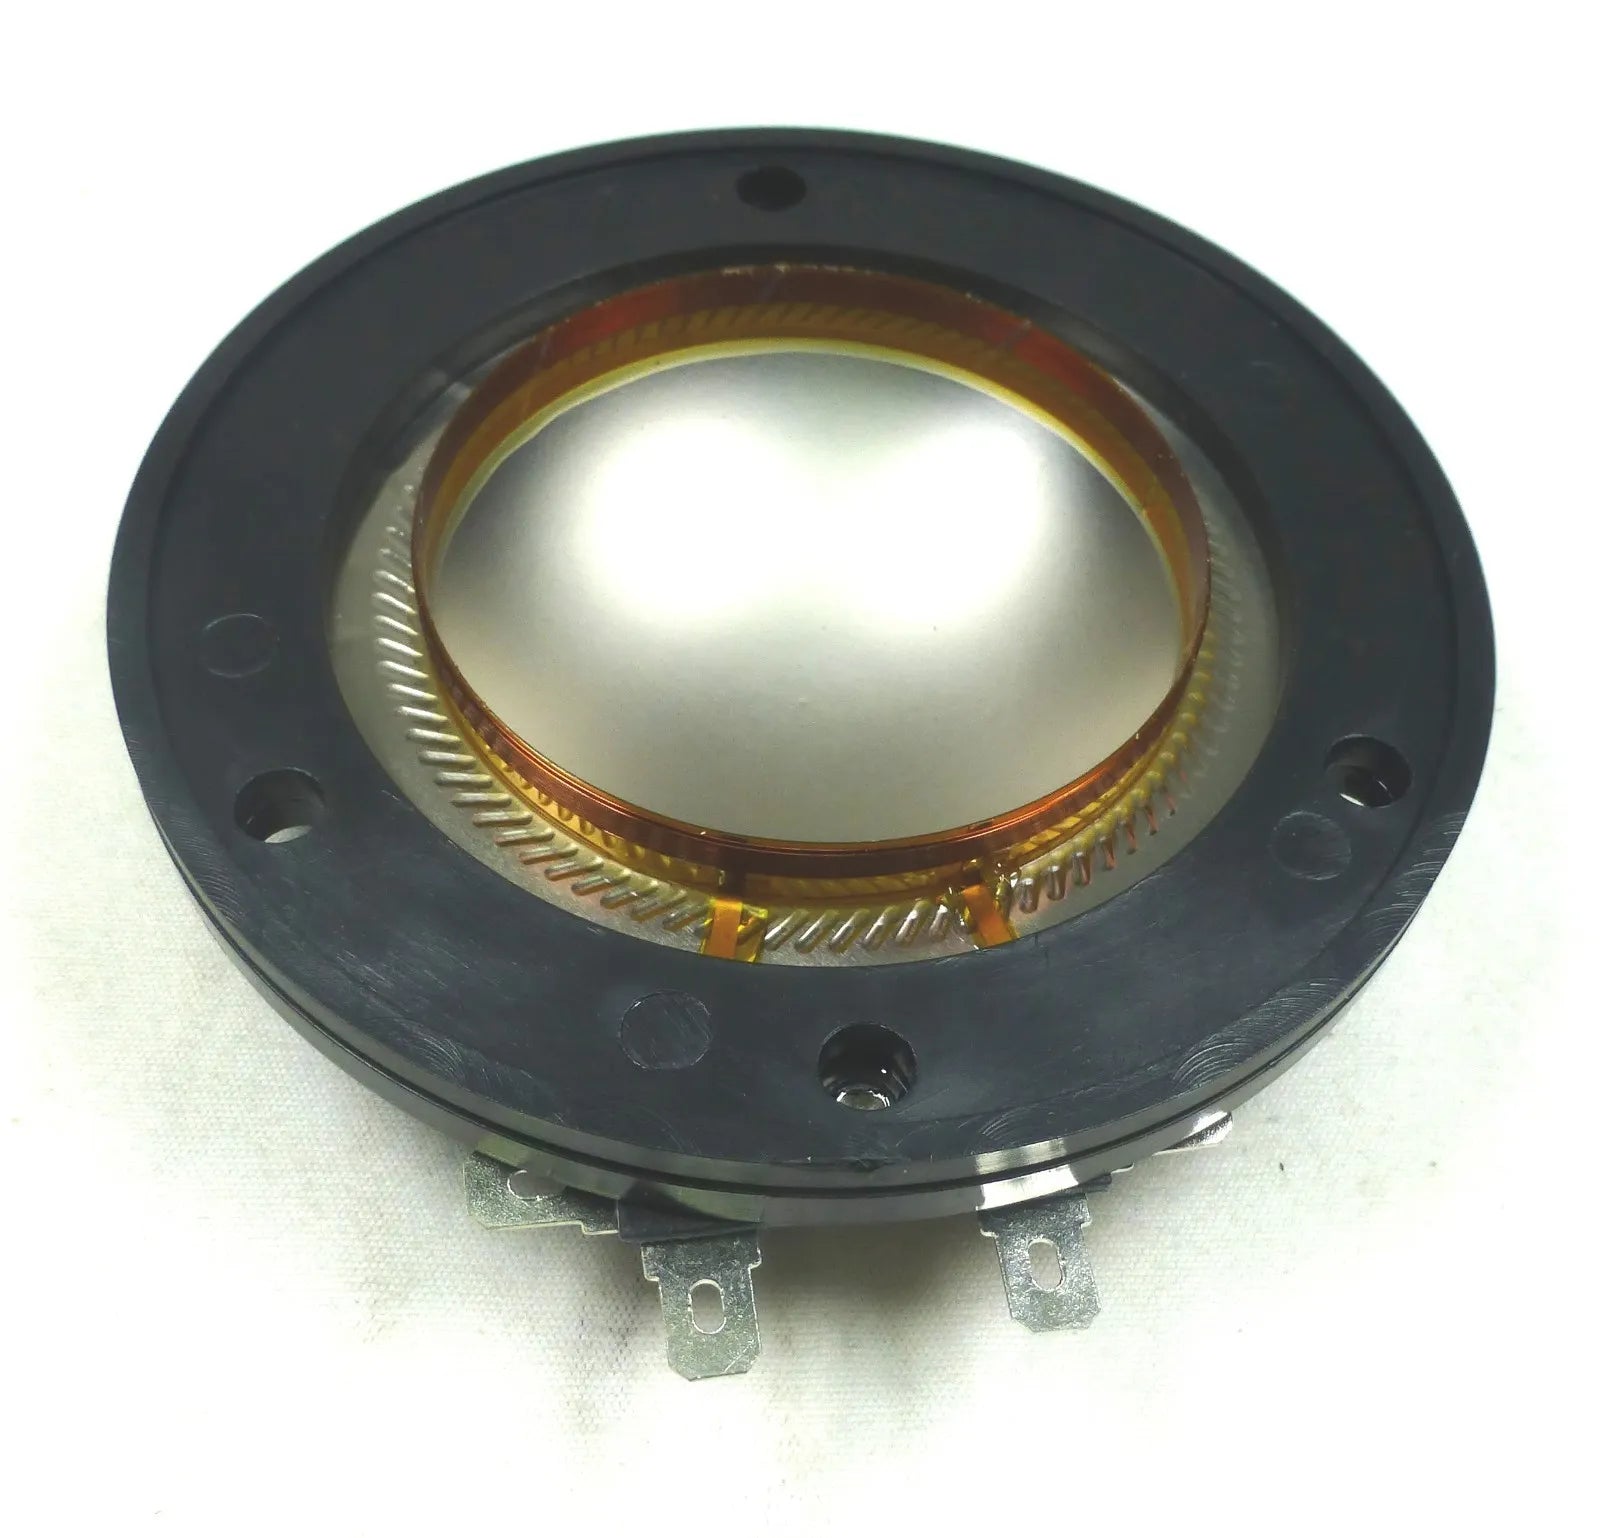 Replacement Diaphragm for Community HFE1, HFE2, CPL Series 8 Ohms